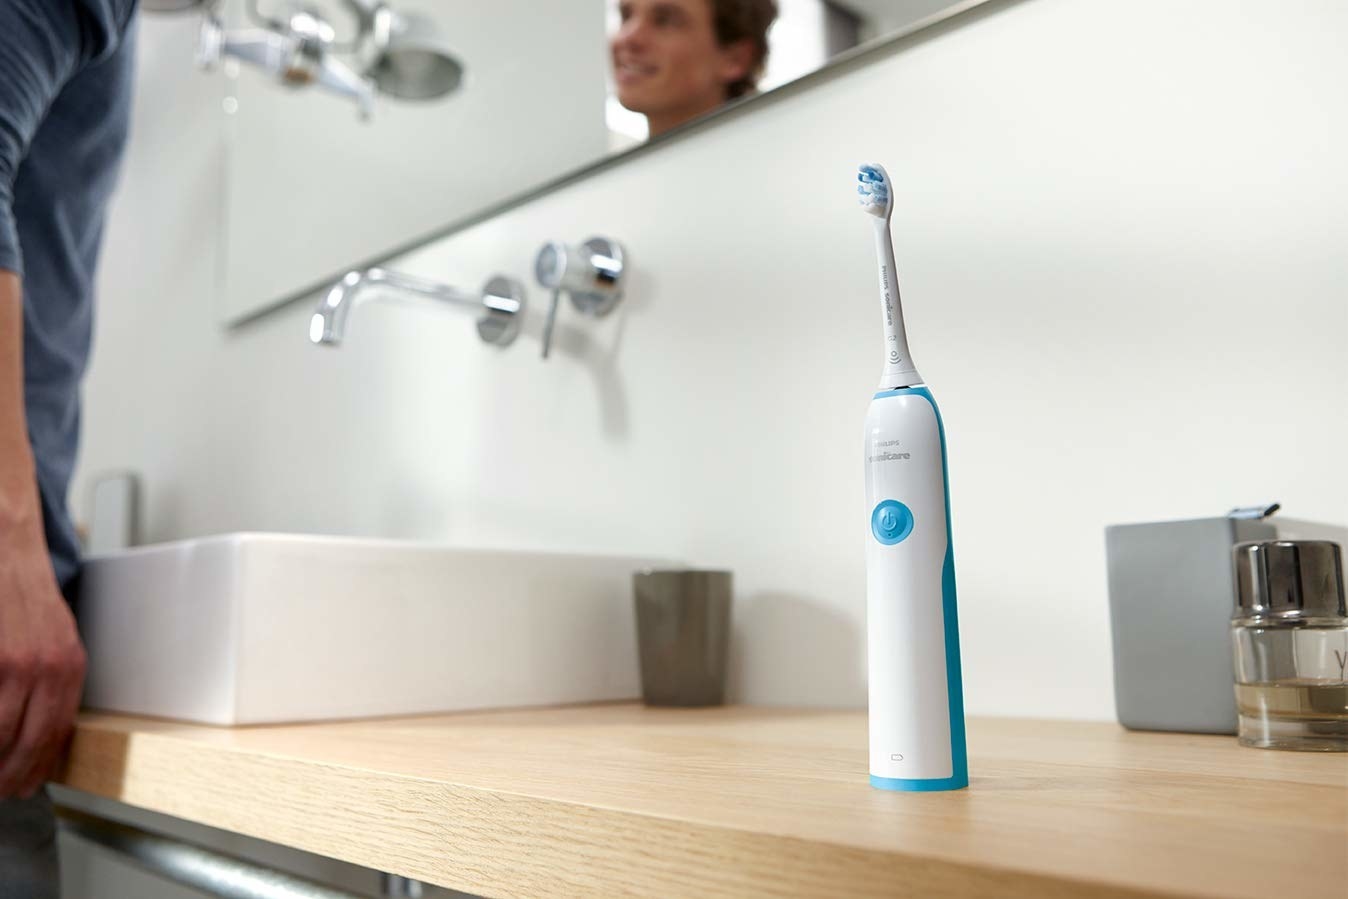 An image of an electric toothbrush kept on bathroom countertop